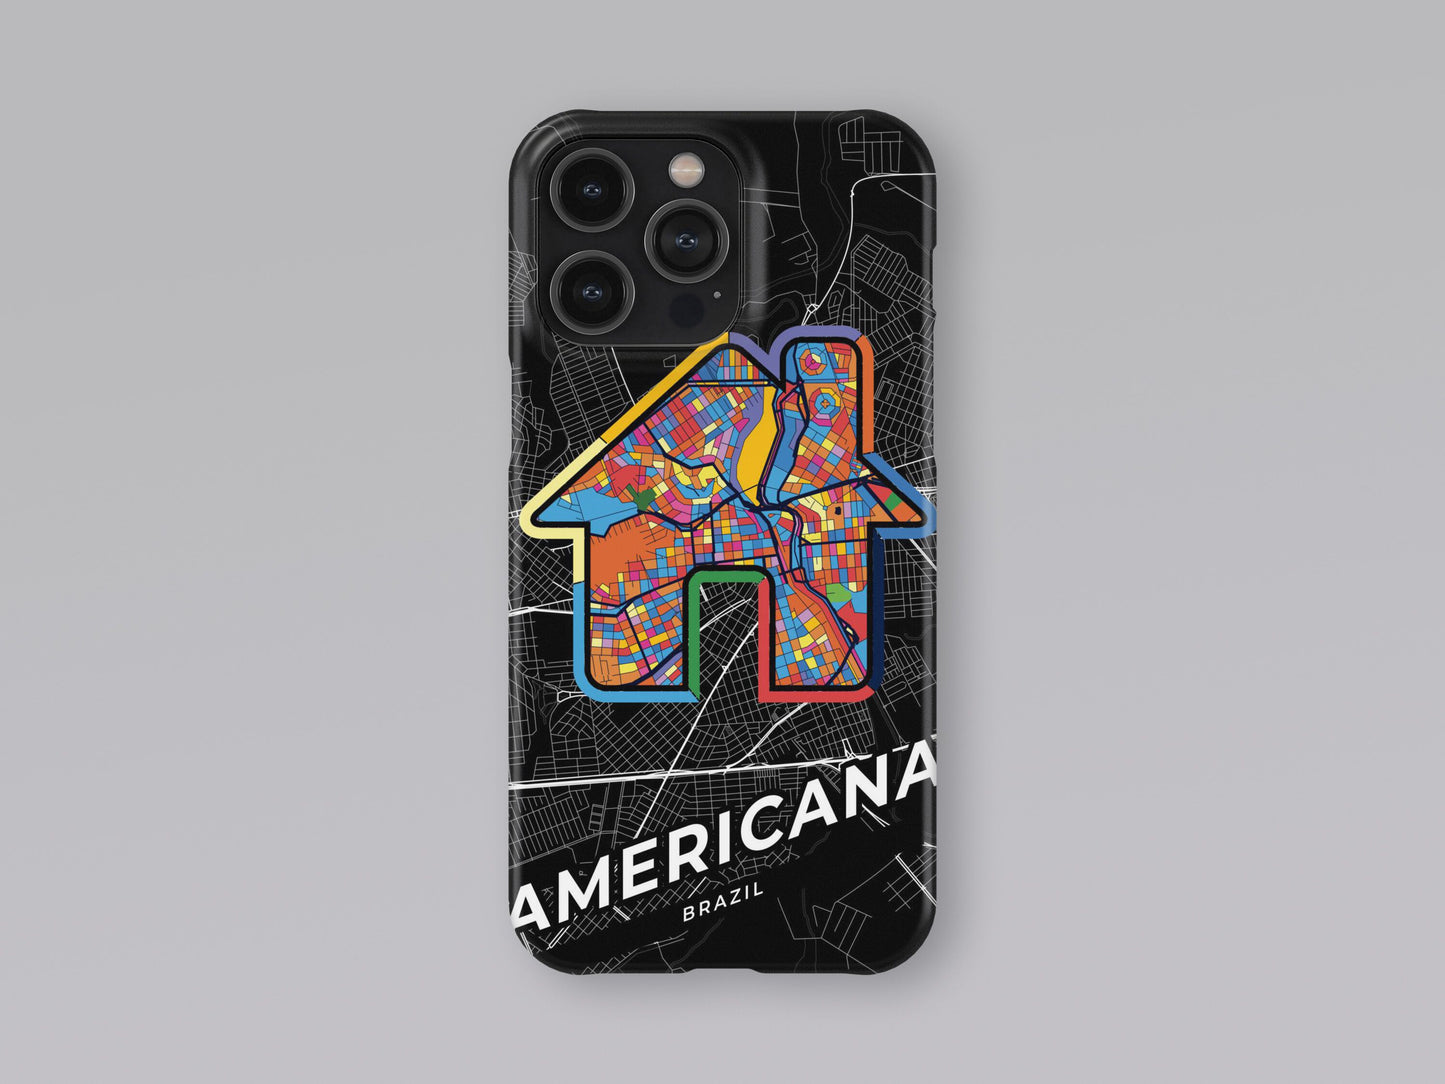 Americana Brazil slim phone case with colorful icon. Birthday, wedding or housewarming gift. Couple match cases. 3